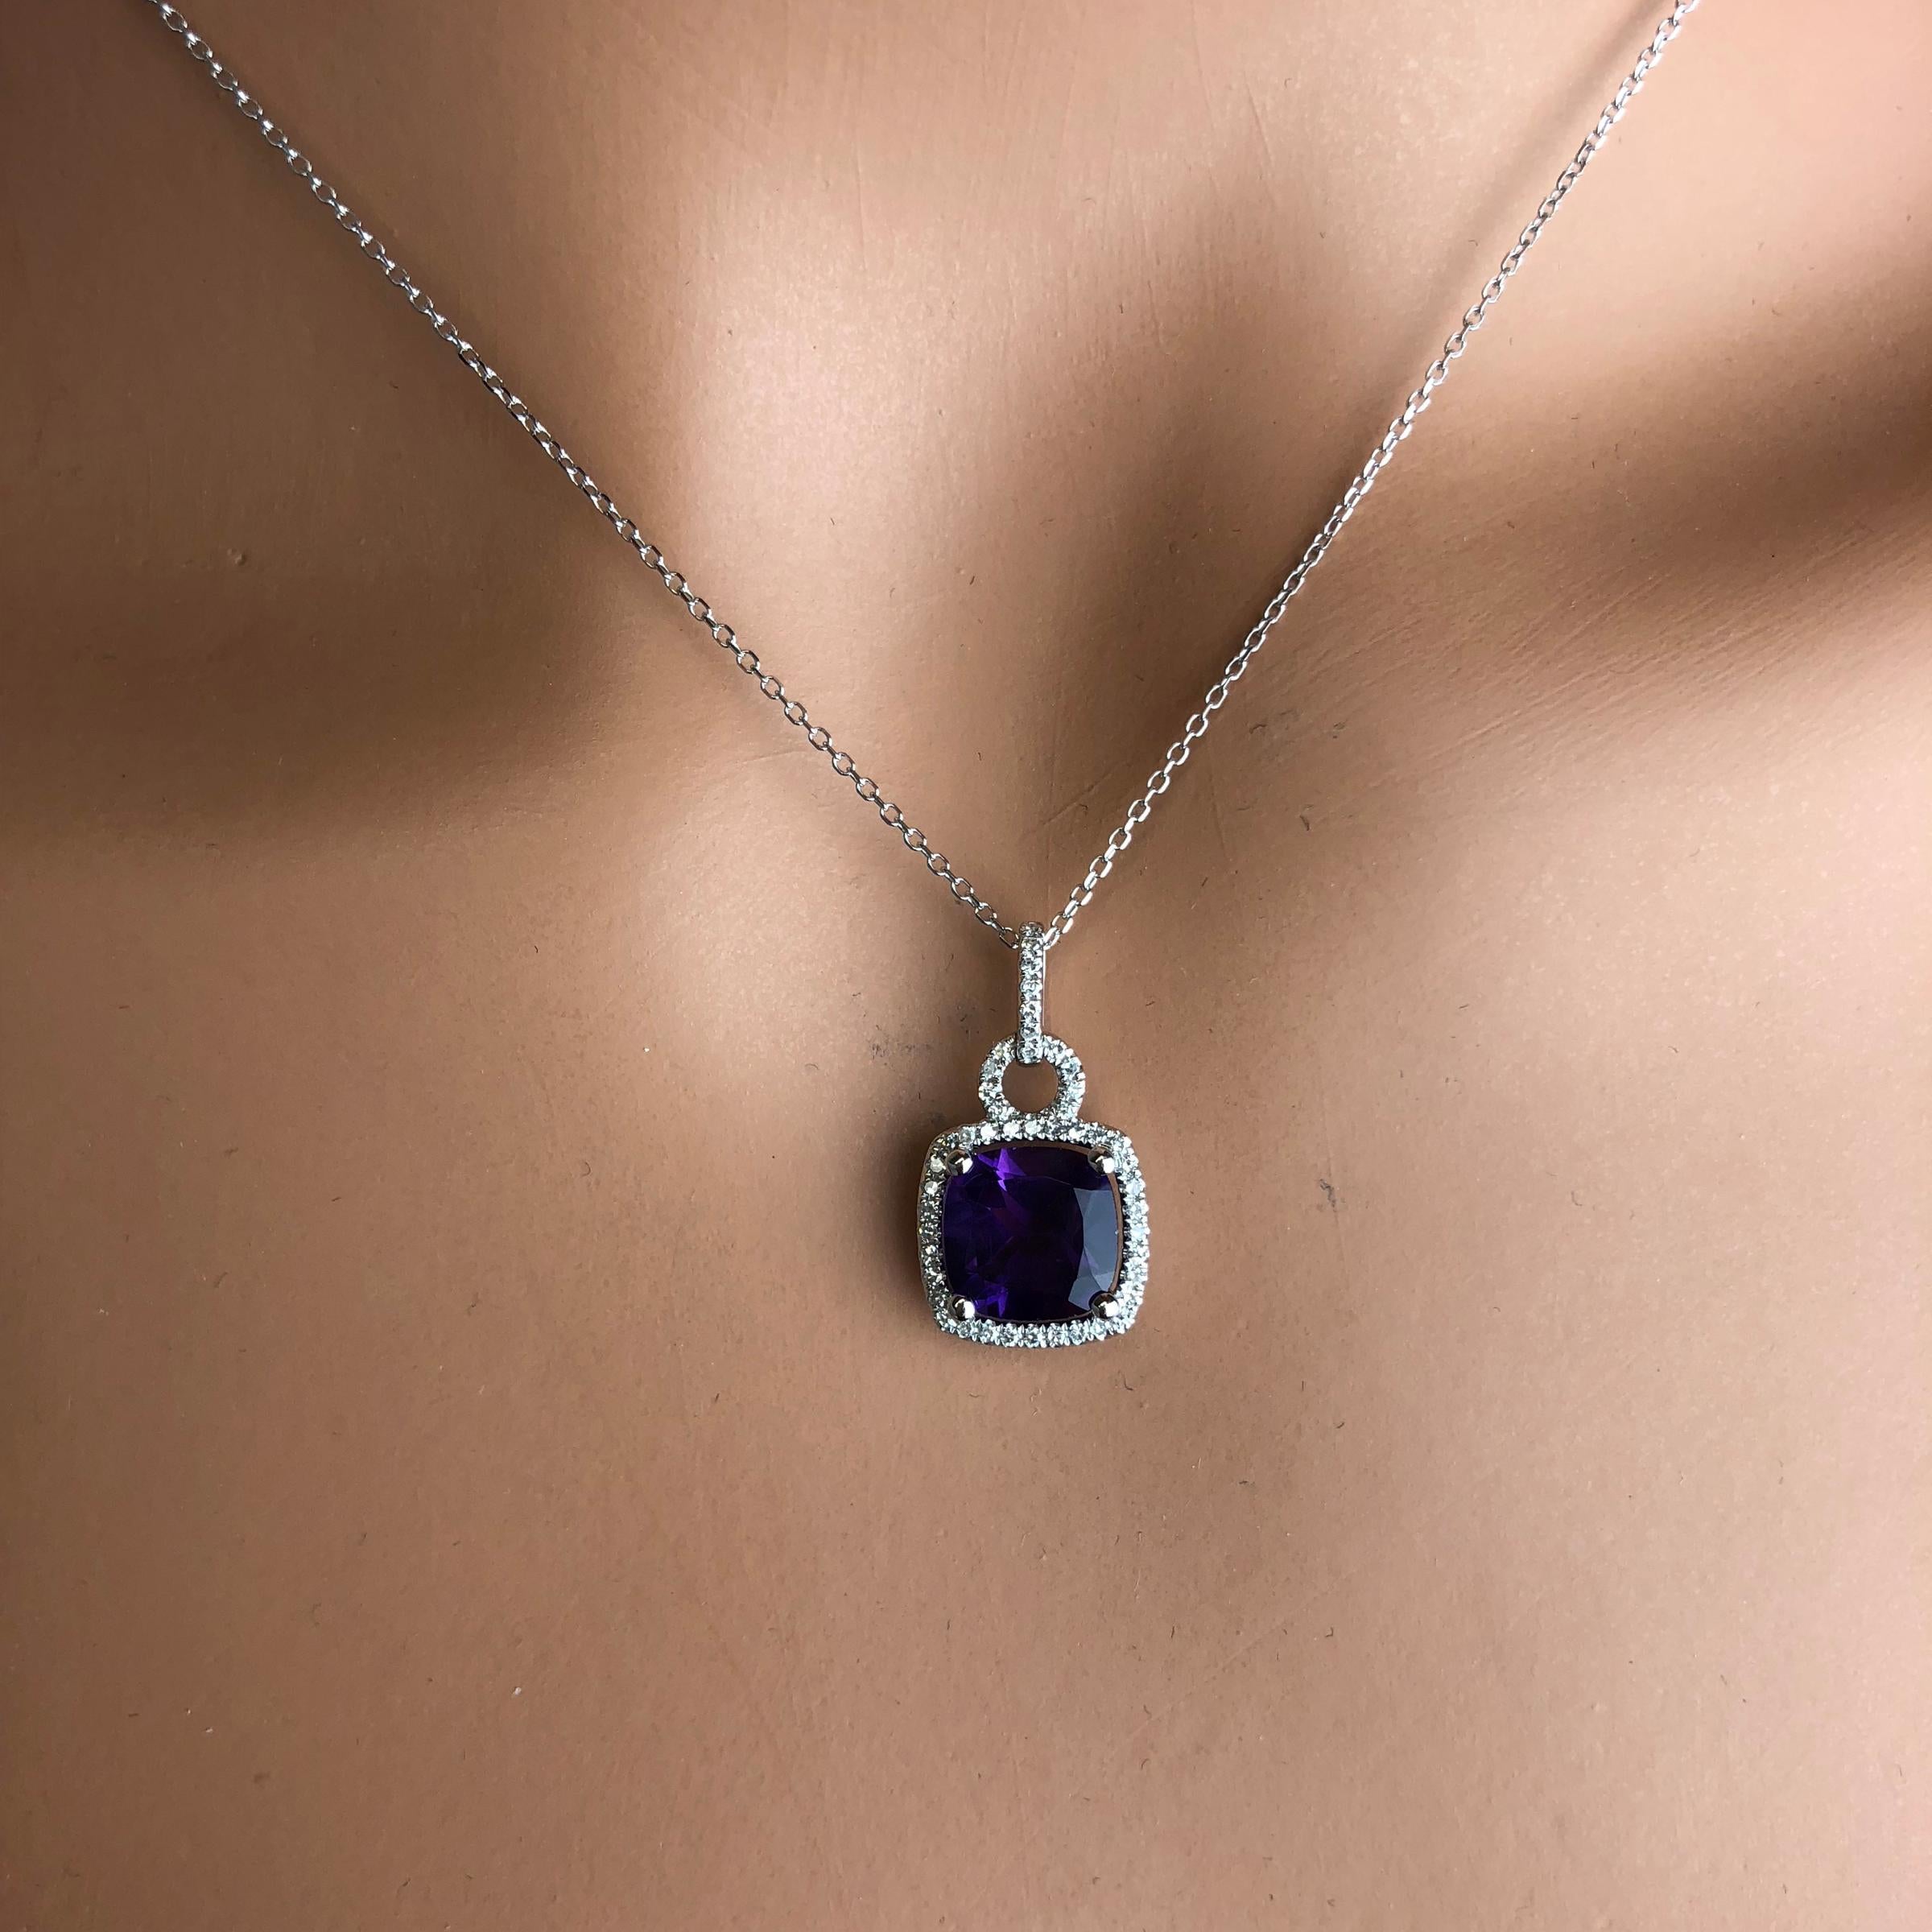 (DiamondTown) This lovely halo pendant features 2.20 carats cushion cut fine amethyst, surrounded by a halo of round white diamonds. Additional diamonds decorate the bail.

Center: 2.20 Carat Fine Amethyst
Diamond Halo: 47 round diamonds total 0.18